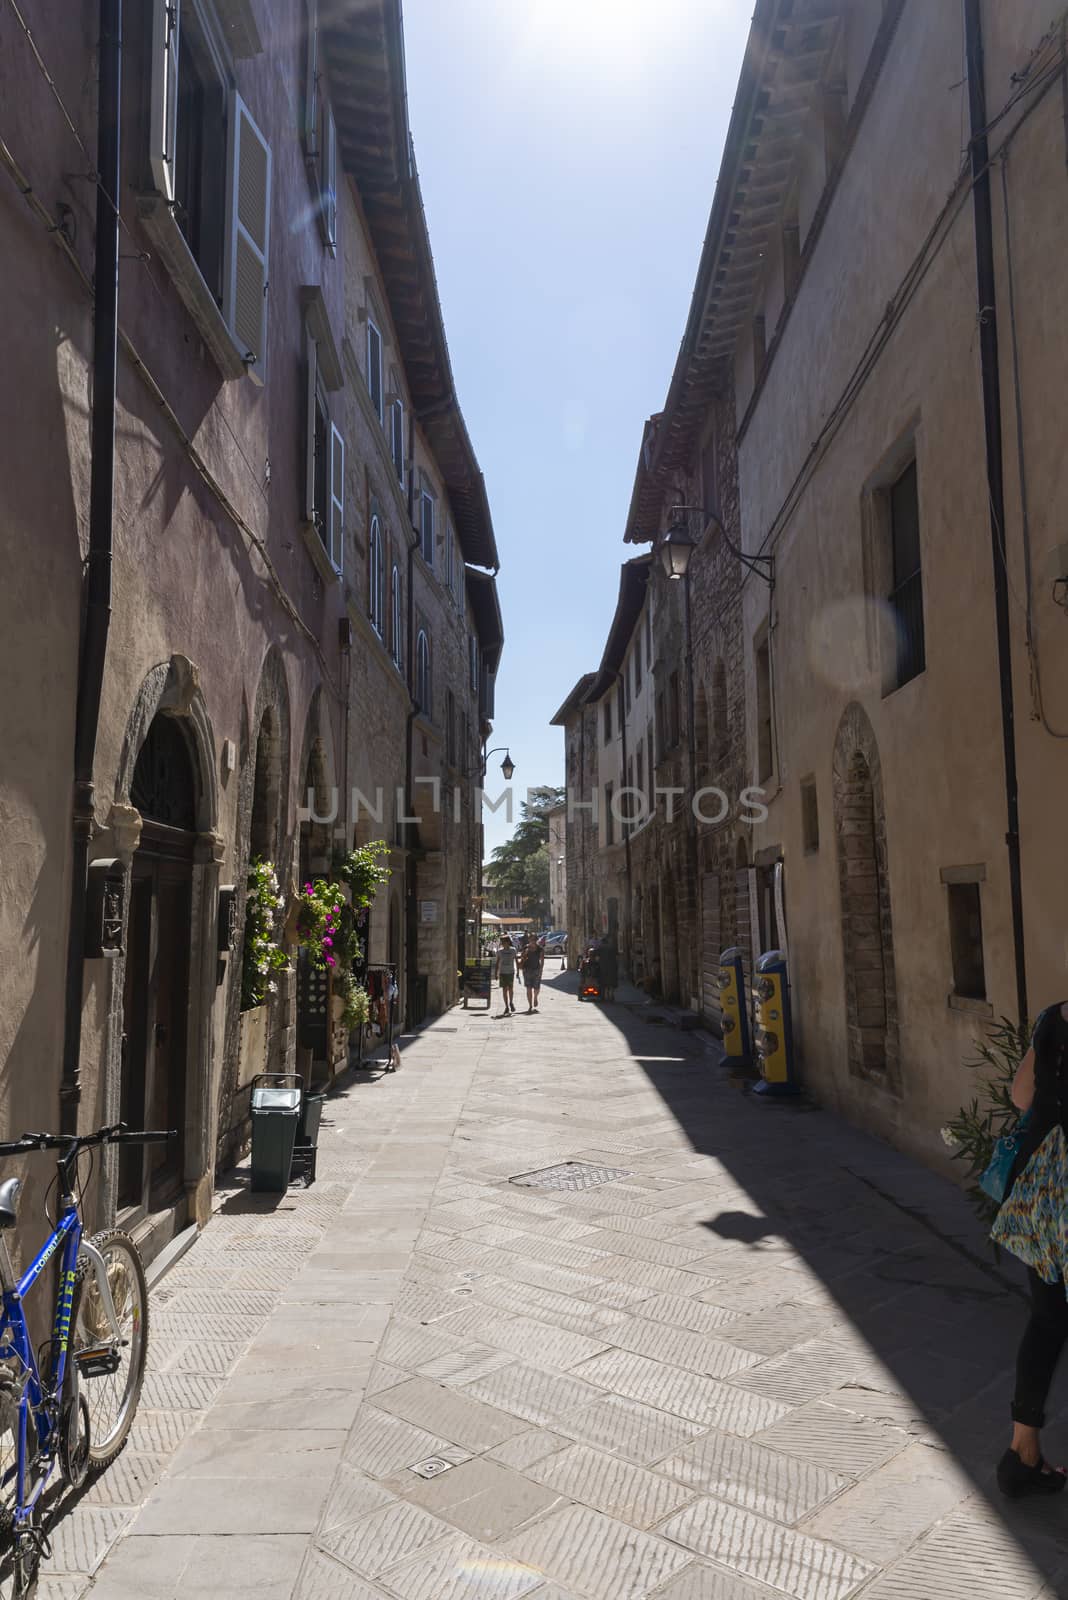 gubbio,italy august 29 2020:street camillo benso count of cavour in the center of Gubbio